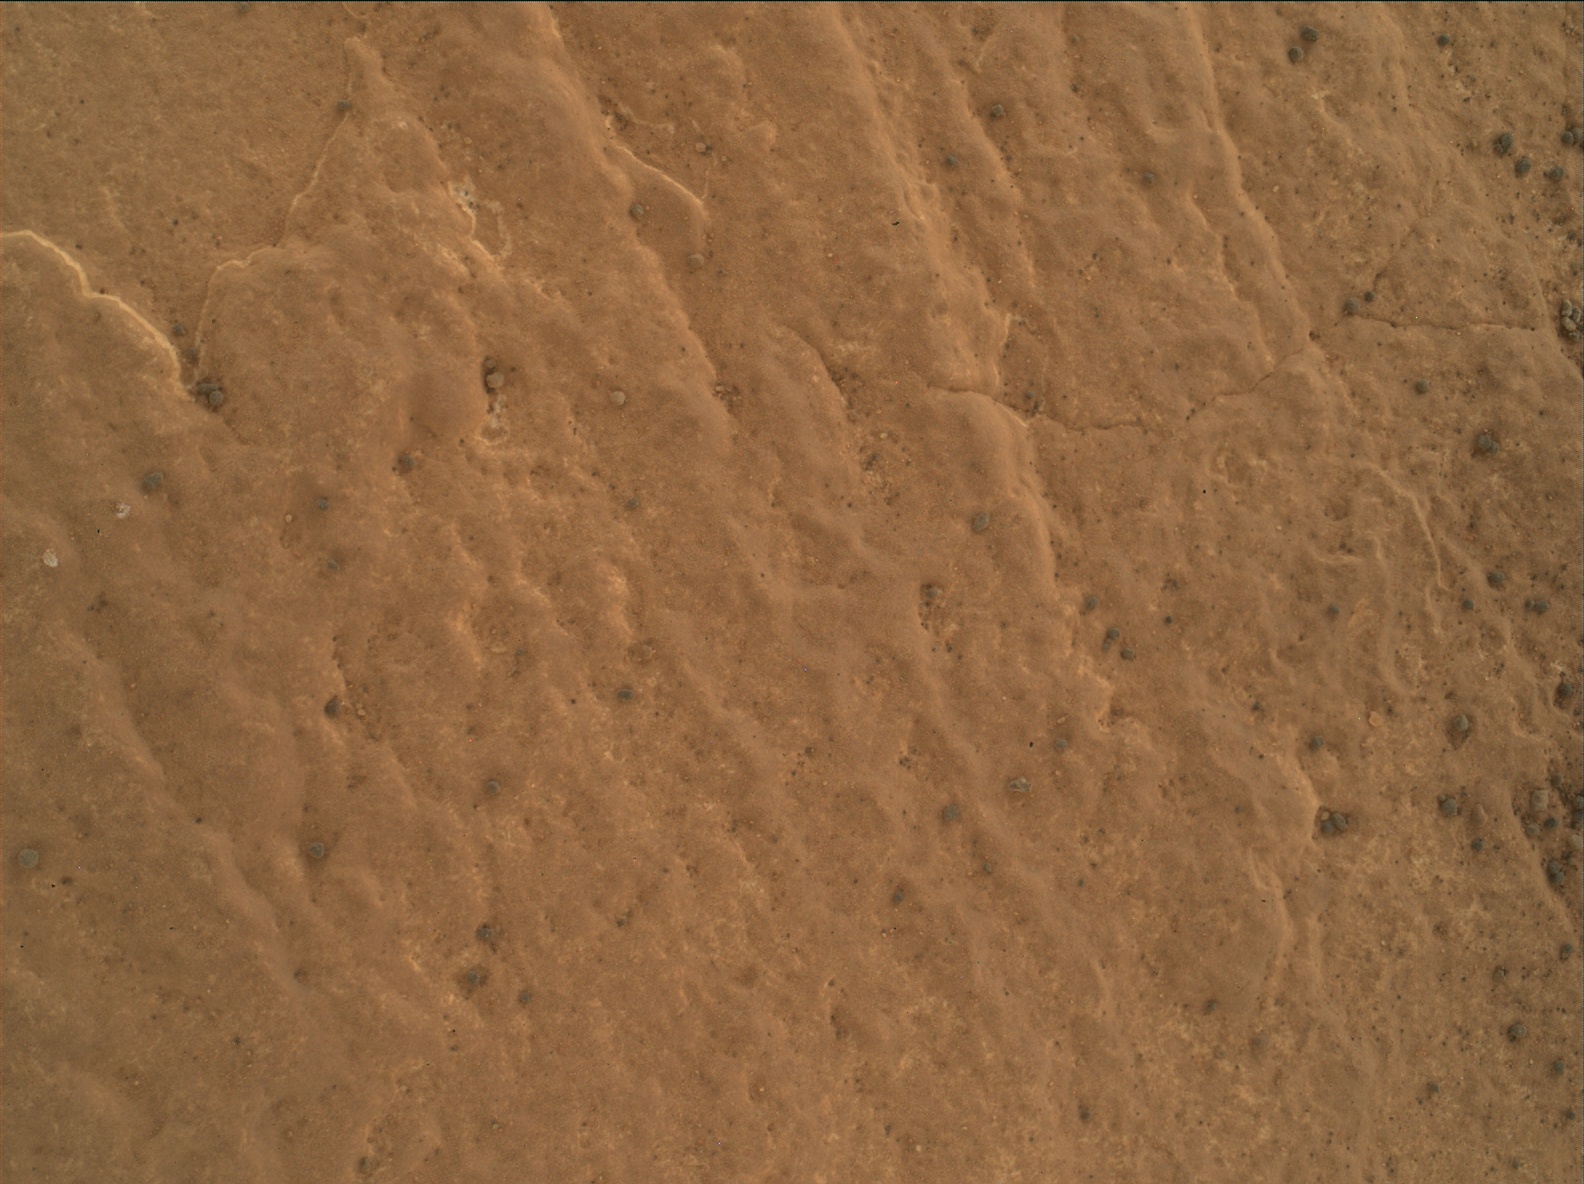 Nasa's Mars rover Curiosity acquired this image using its Mars Hand Lens Imager (MAHLI) on Sol 1729